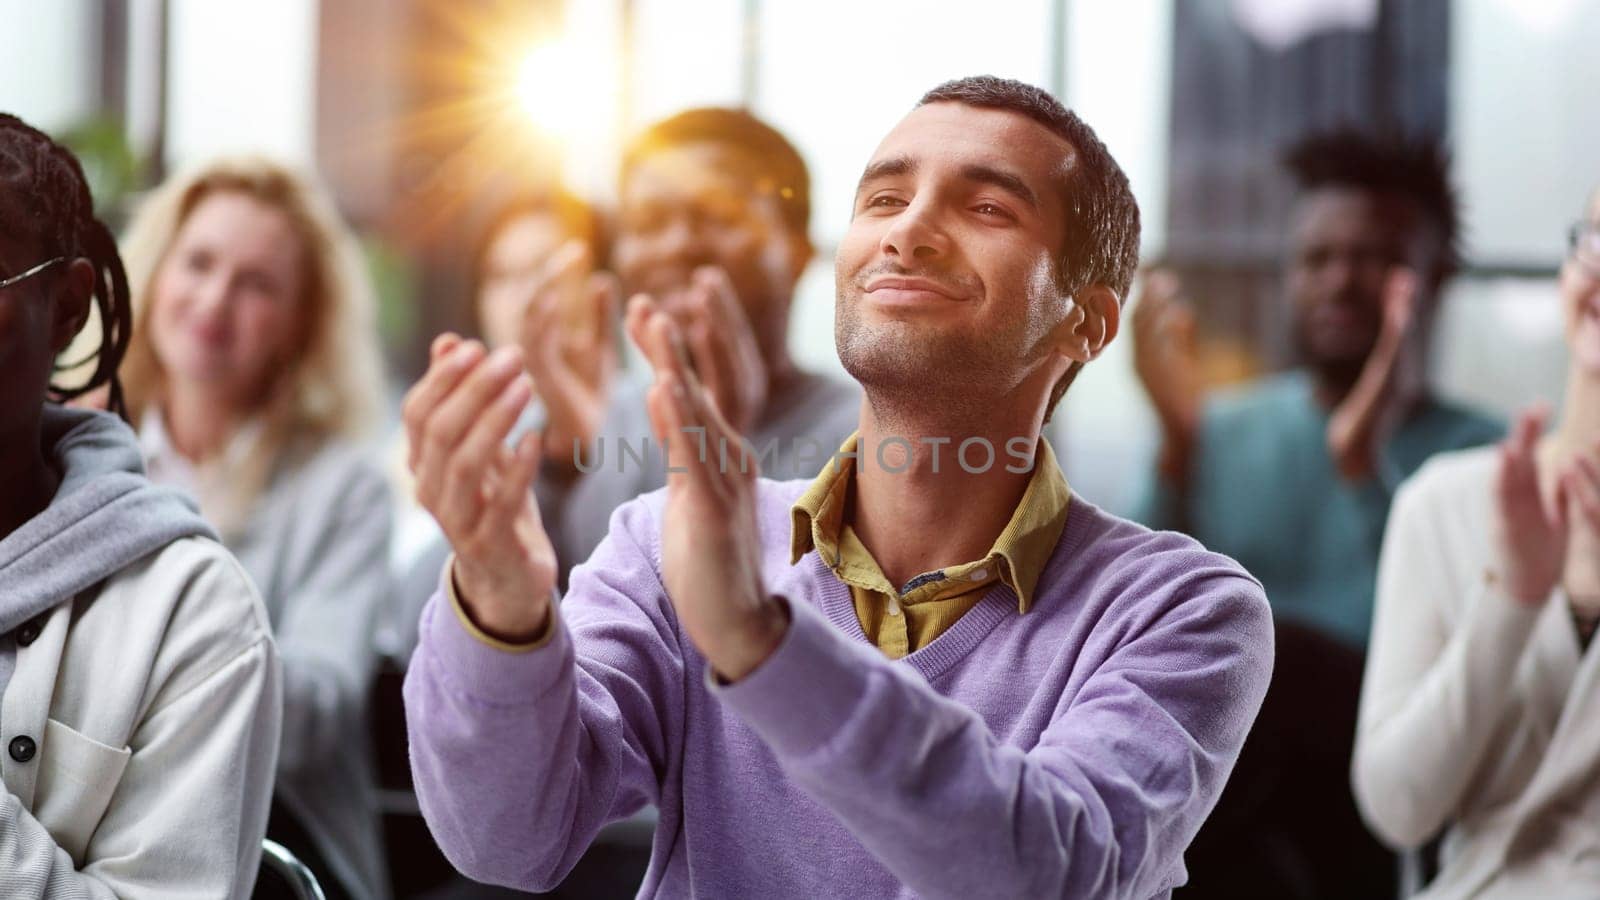 Seminar business meeting applause speaker. Crowded smiling audience clapping person speech. by Prosto